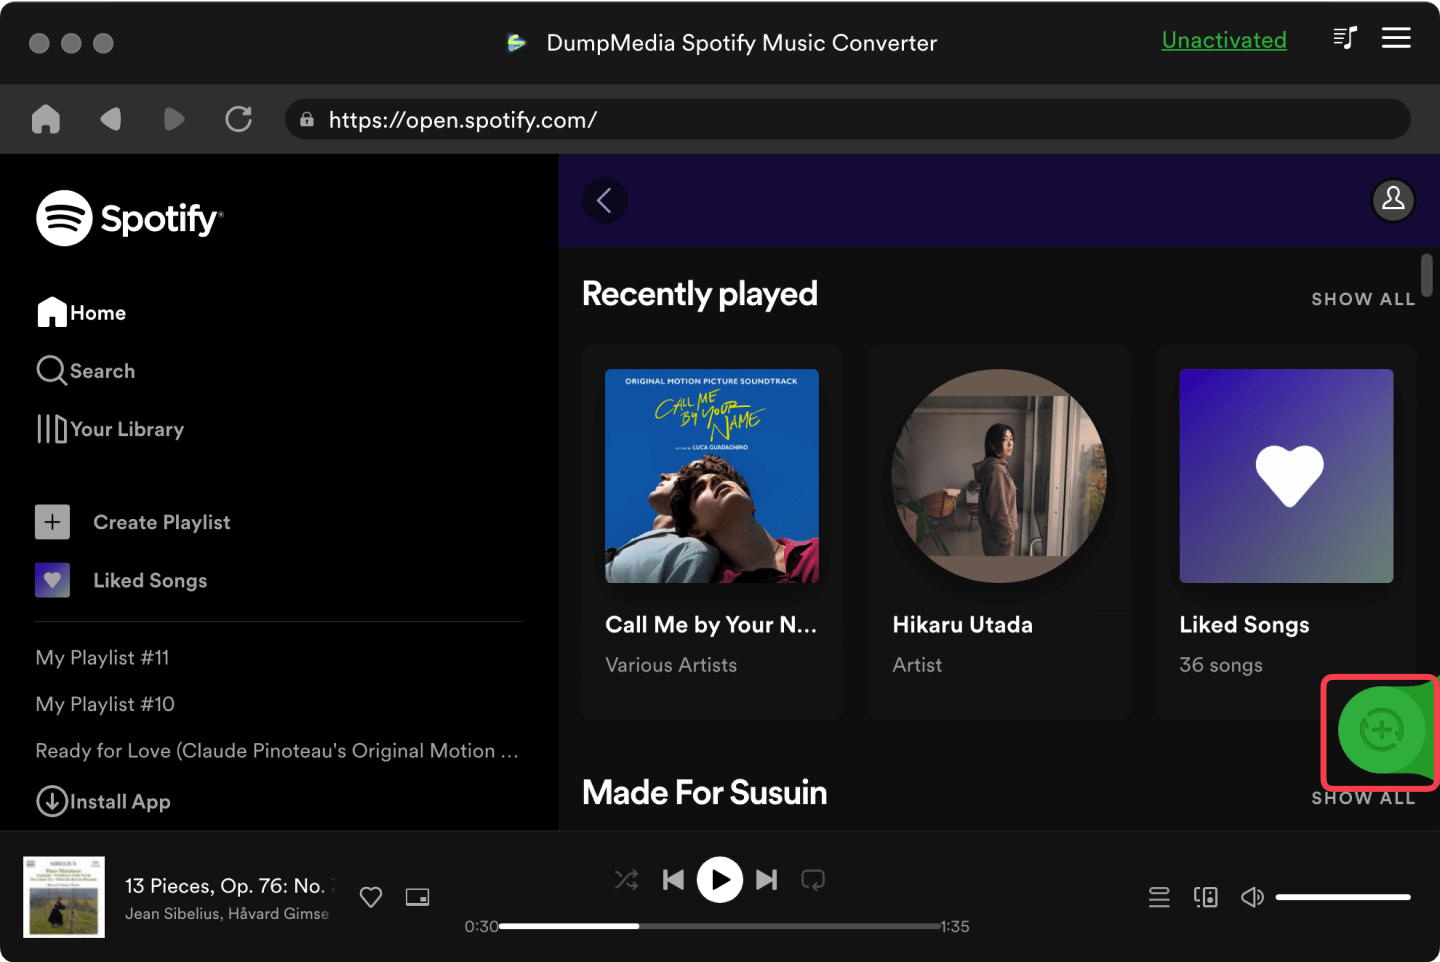 Converting Spotify Songs to MP3 Format